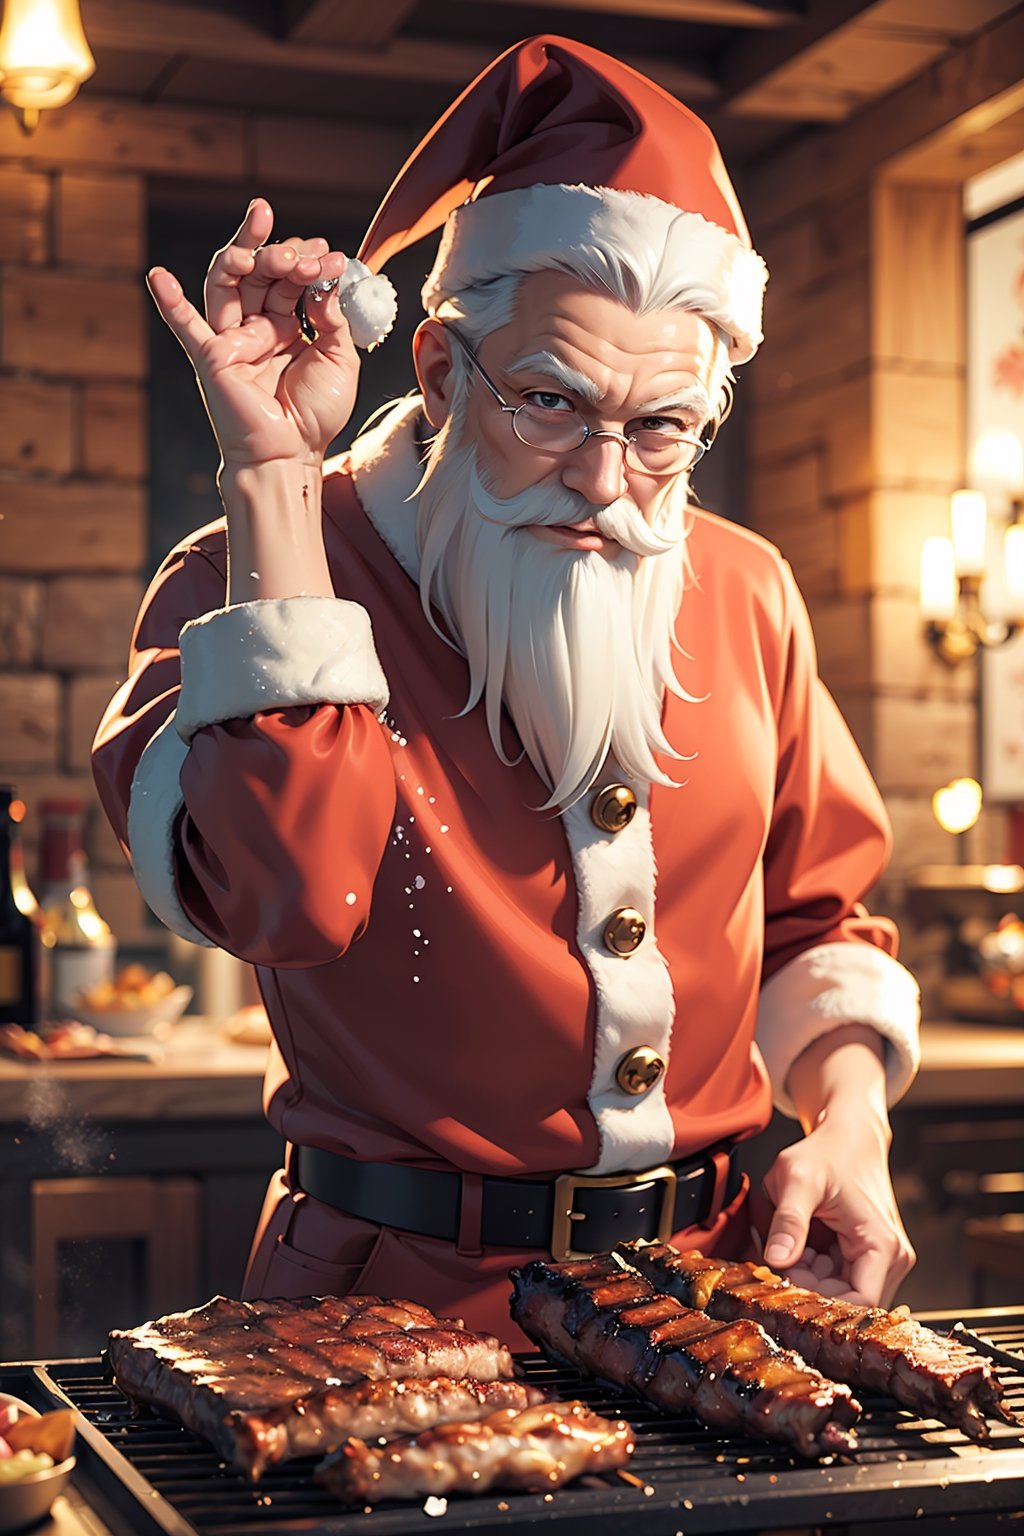 ((anime)), old Santa with white beard sprinkle salt on BBQ ribs, surprise expressions, dynamic angle, depth of field, detail XL,realistic,More Detail,SaltBaeMeme